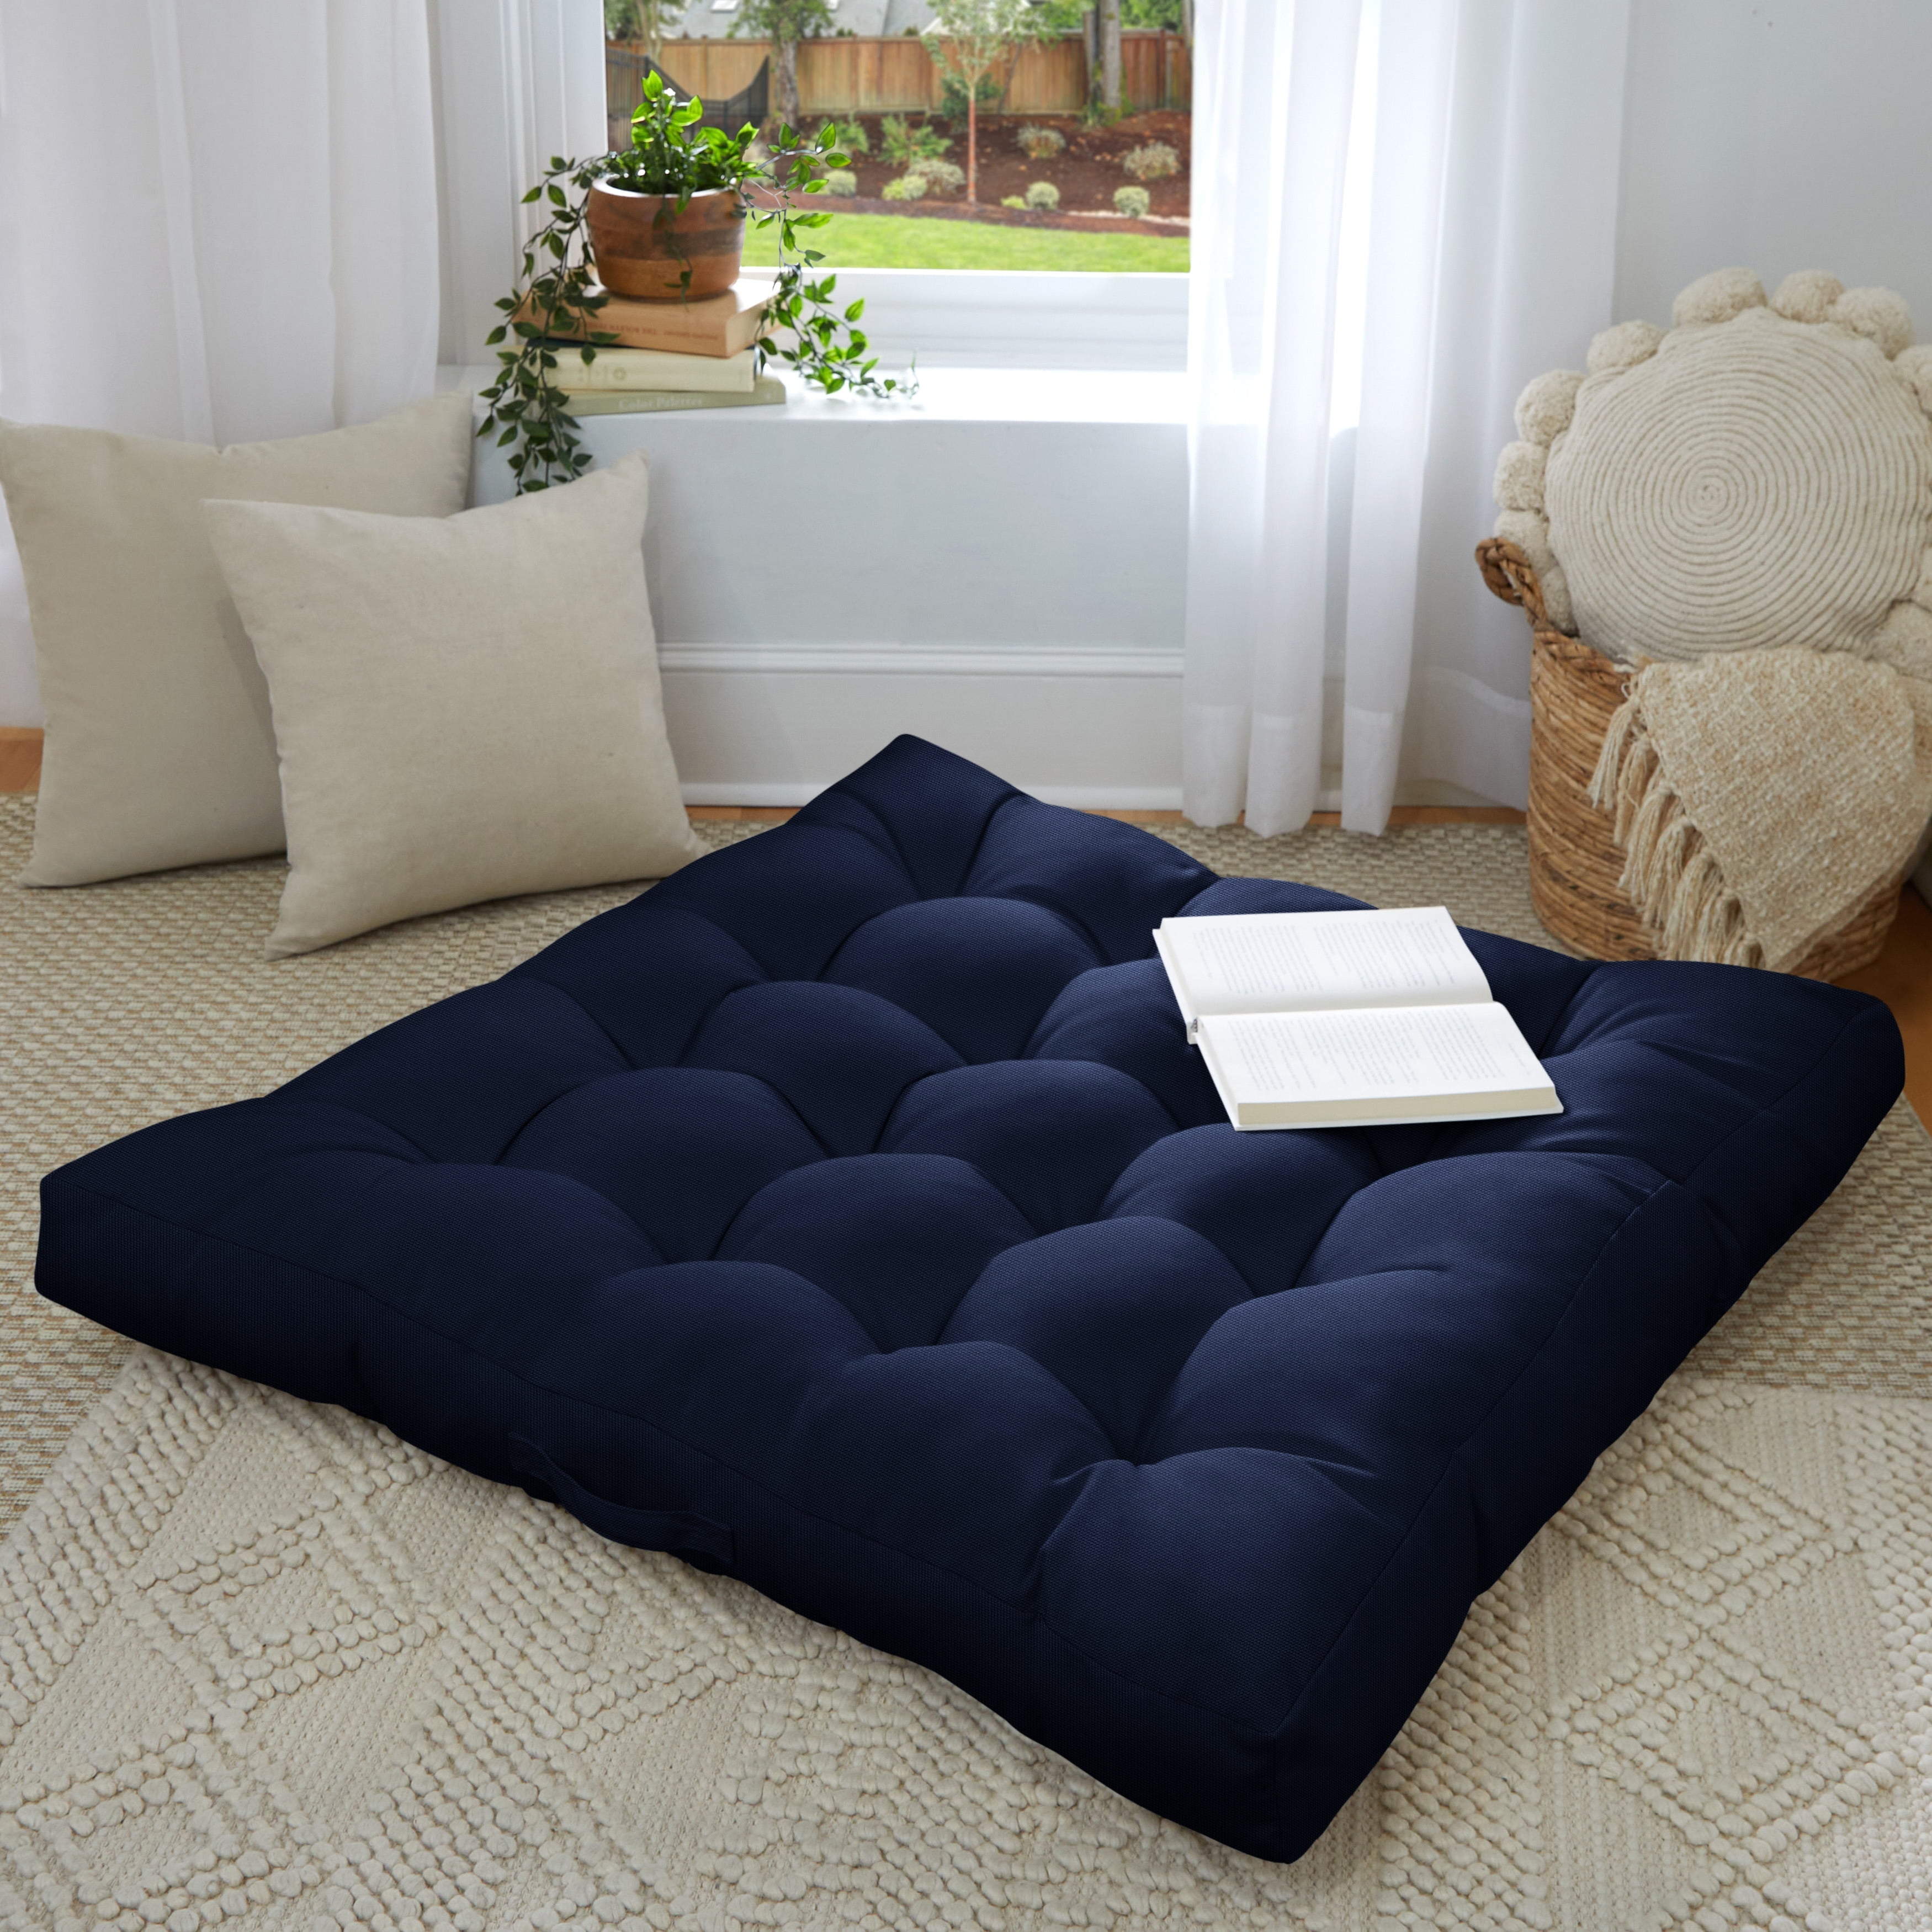 Giant Floor Pillows – Poole Party of 5